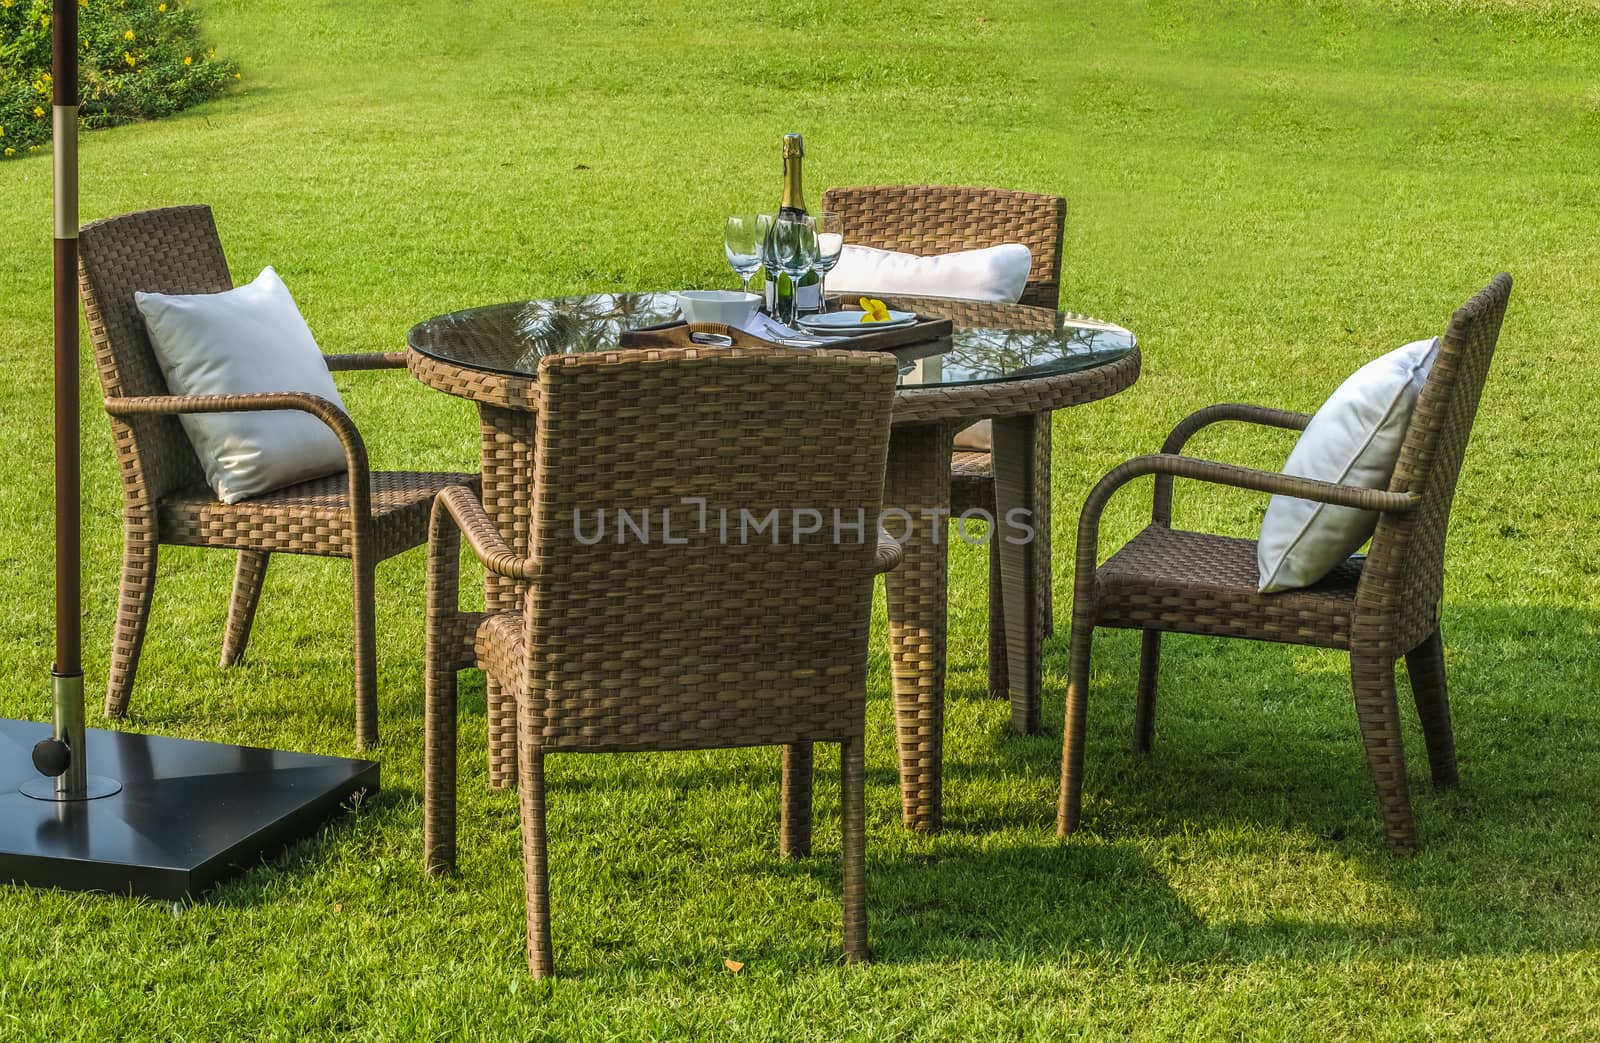 Water resistant outdoor rattan furniture, table and chairs